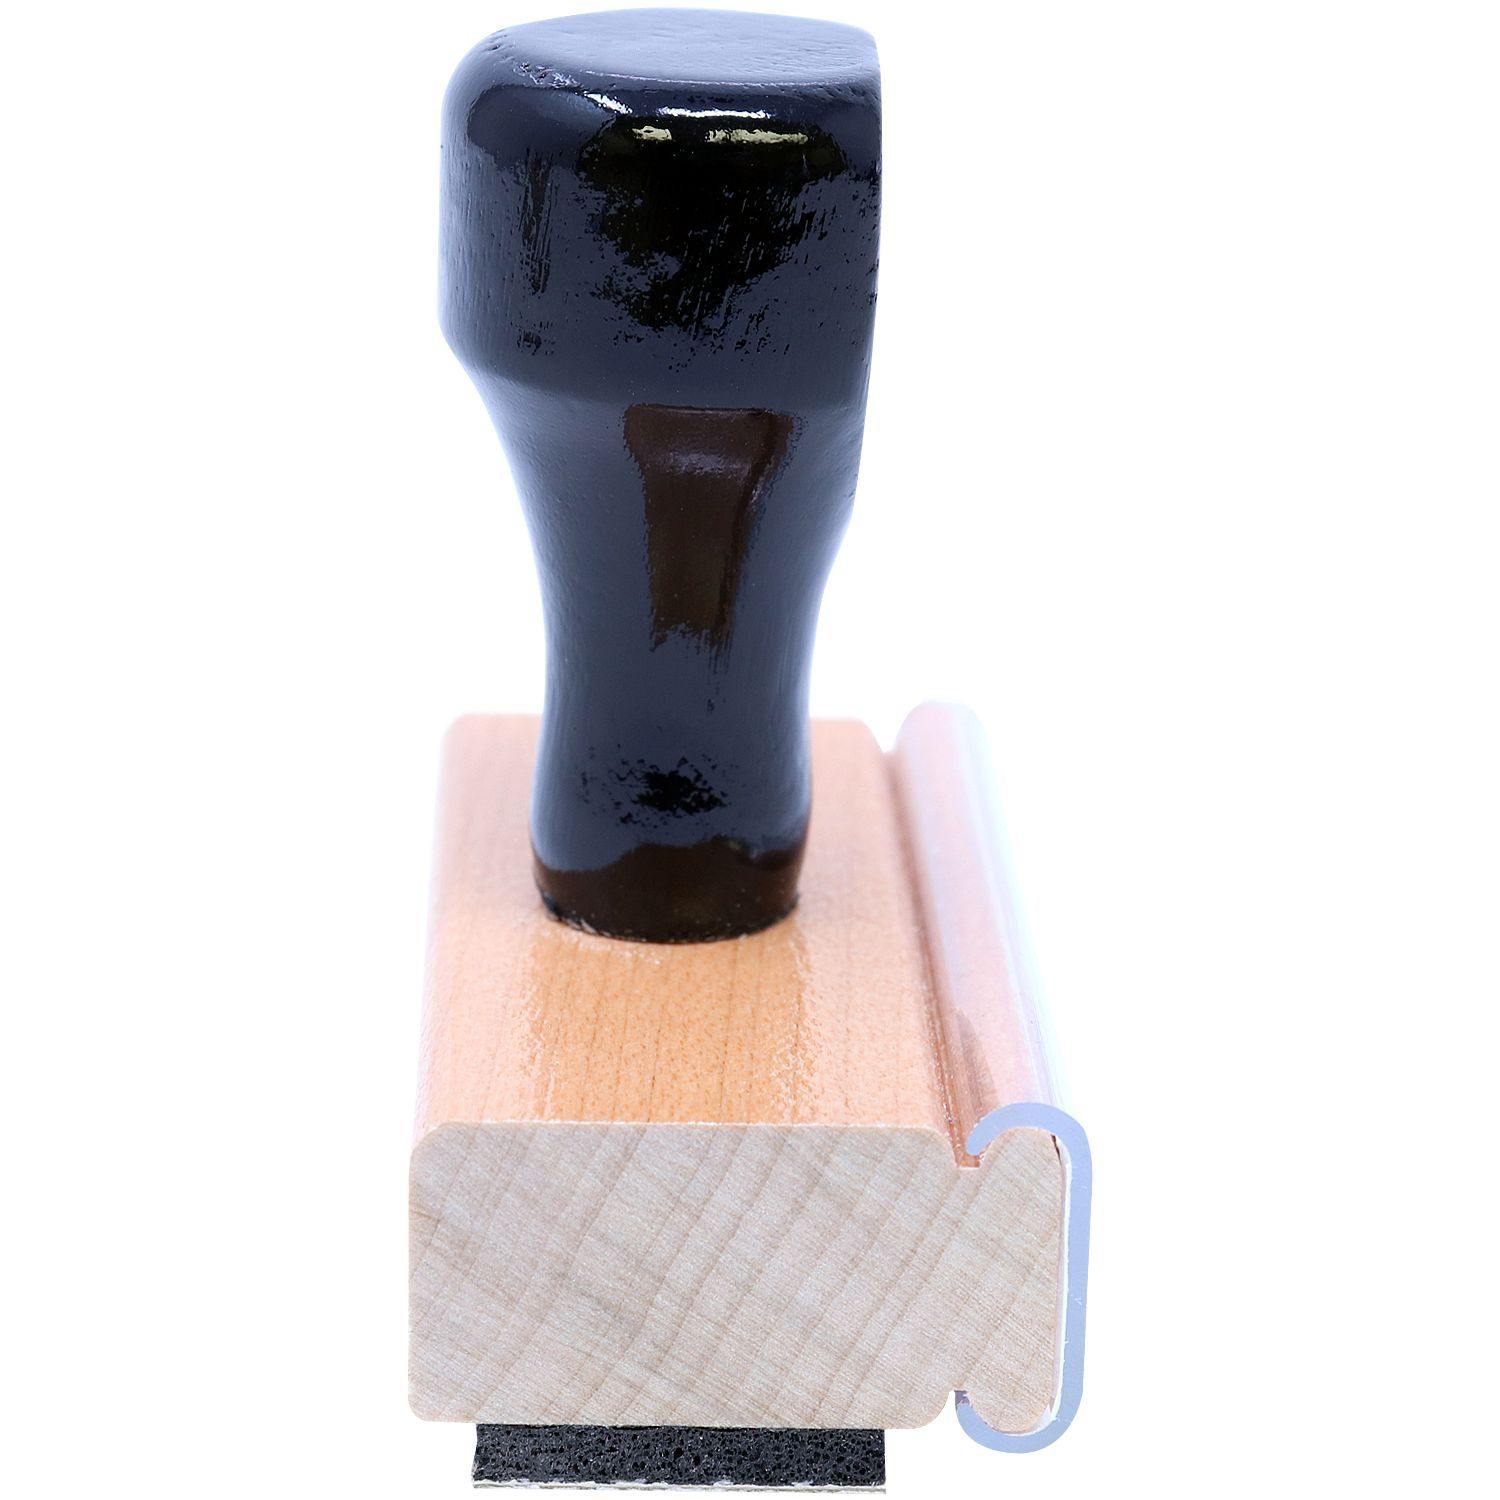 Large Special Services Rubber Stamp - Engineer Seal Stamps - Brand_Acorn, Impression Size_Large, Stamp Type_Regular Stamp, Type of Use_Postal & Mailing, Type of Use_Shipping & Receiving